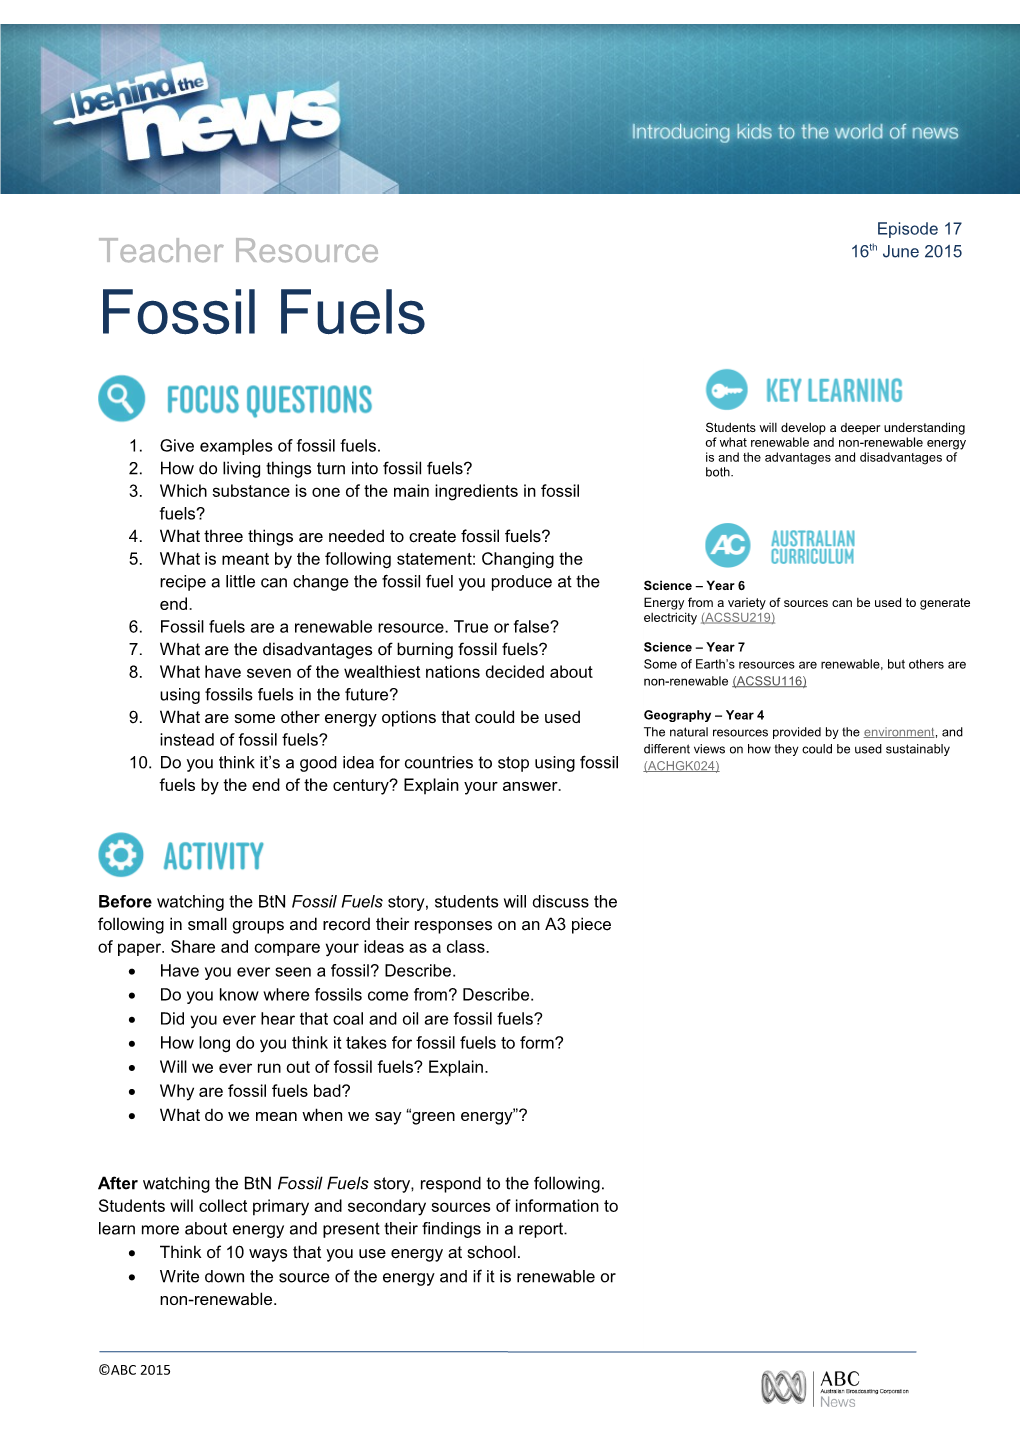 2. How Do Living Things Turn Into Fossil Fuels?